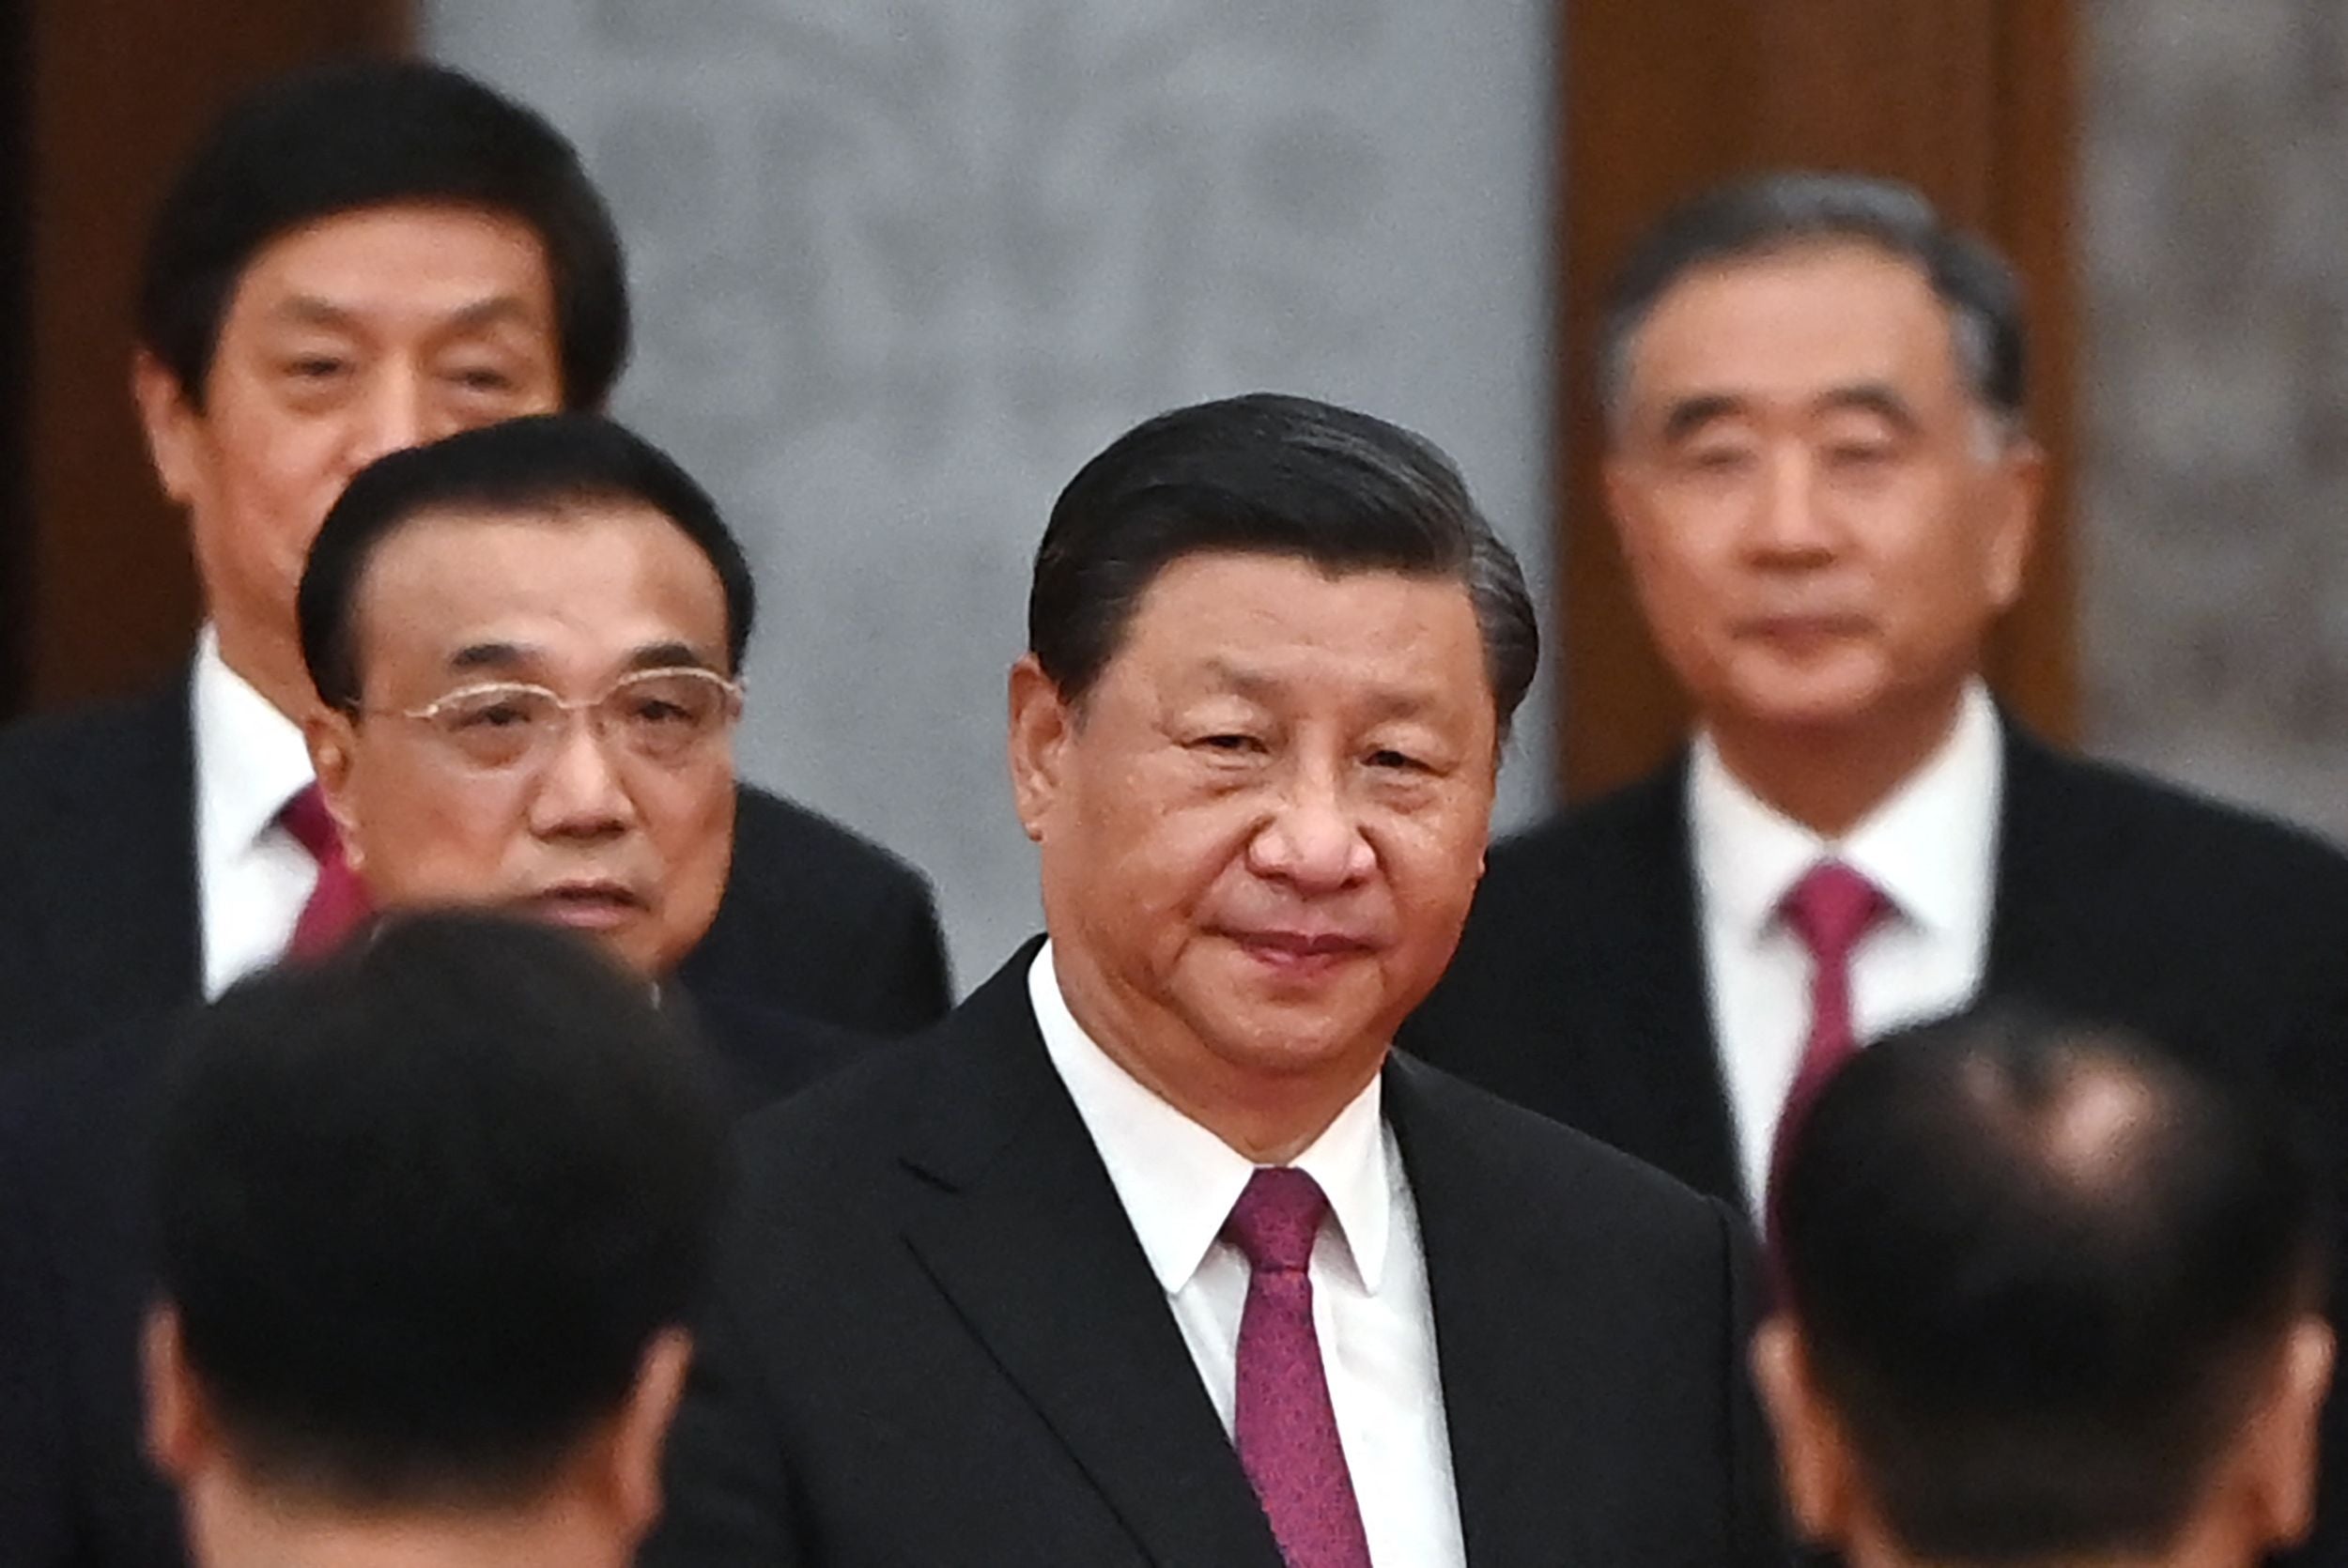 Xi Jinping said China will remain firm in advancing reform and opening up in a bid to add impetus to economic development